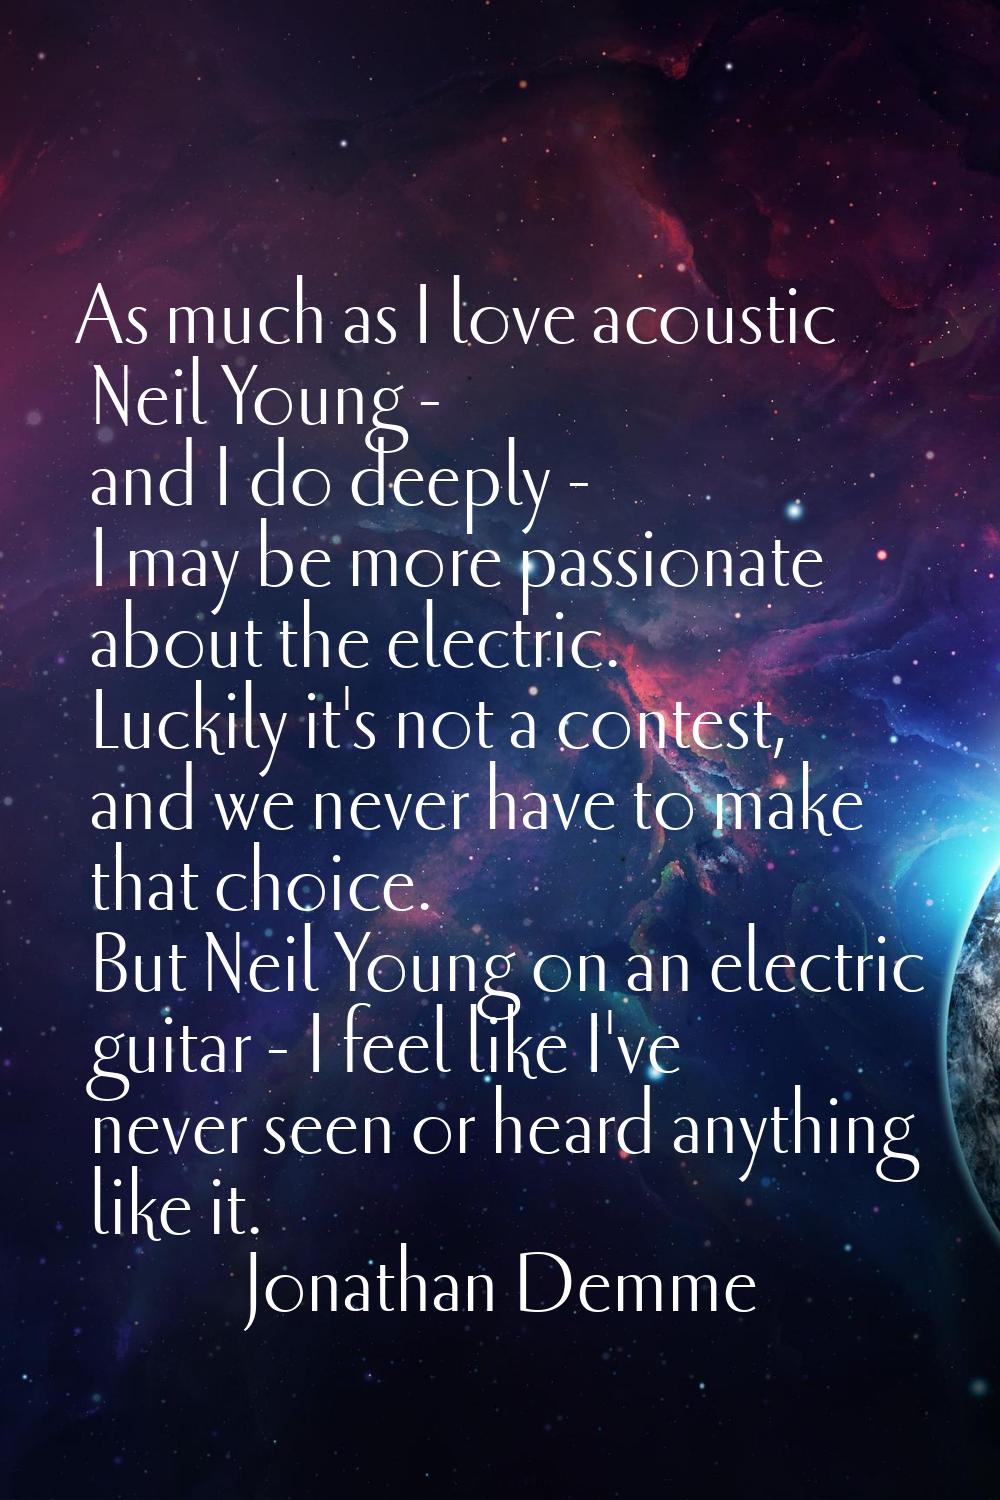 As much as I love acoustic Neil Young - and I do deeply - I may be more passionate about the electr